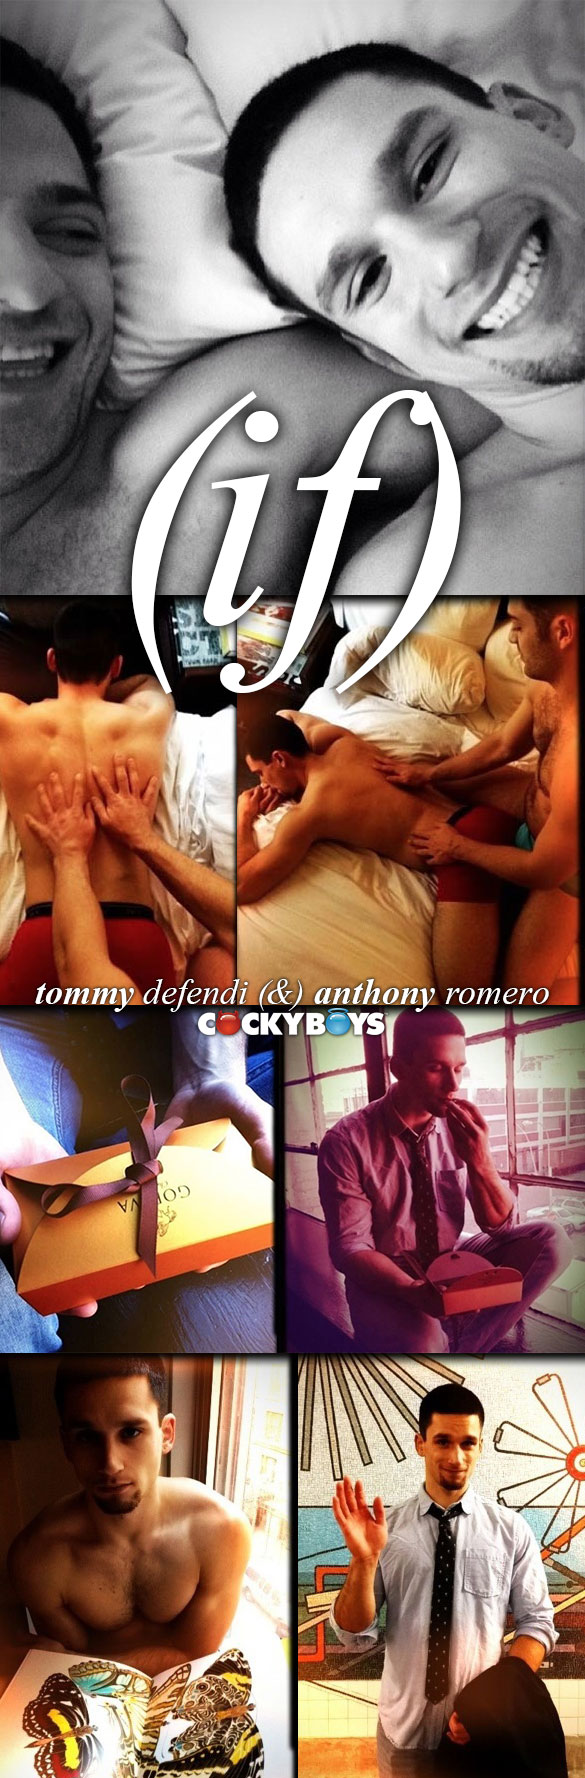 Cocky Boys: Tommy Defendi and Anthony Romero in "If"